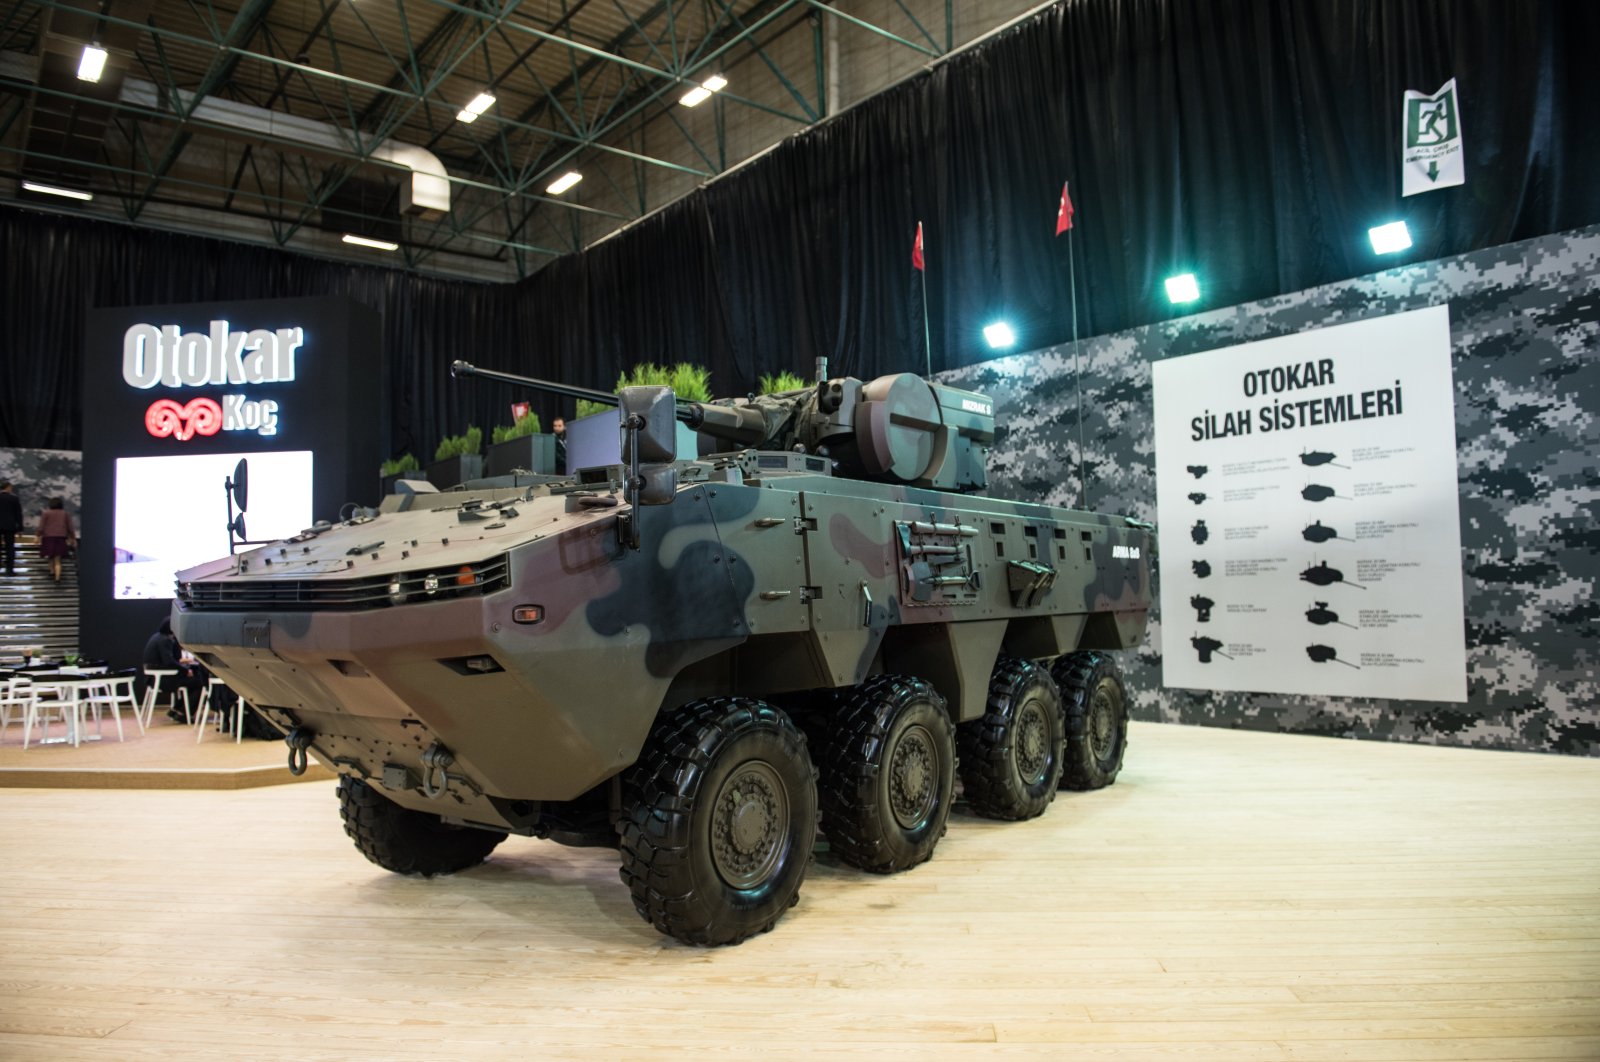 An Arma armored combat vehicle on display at the 13th International Defense Industry Fair (IDEF'17) held in Istanbul between May 9-12, 2017. (Sabah File Photo)